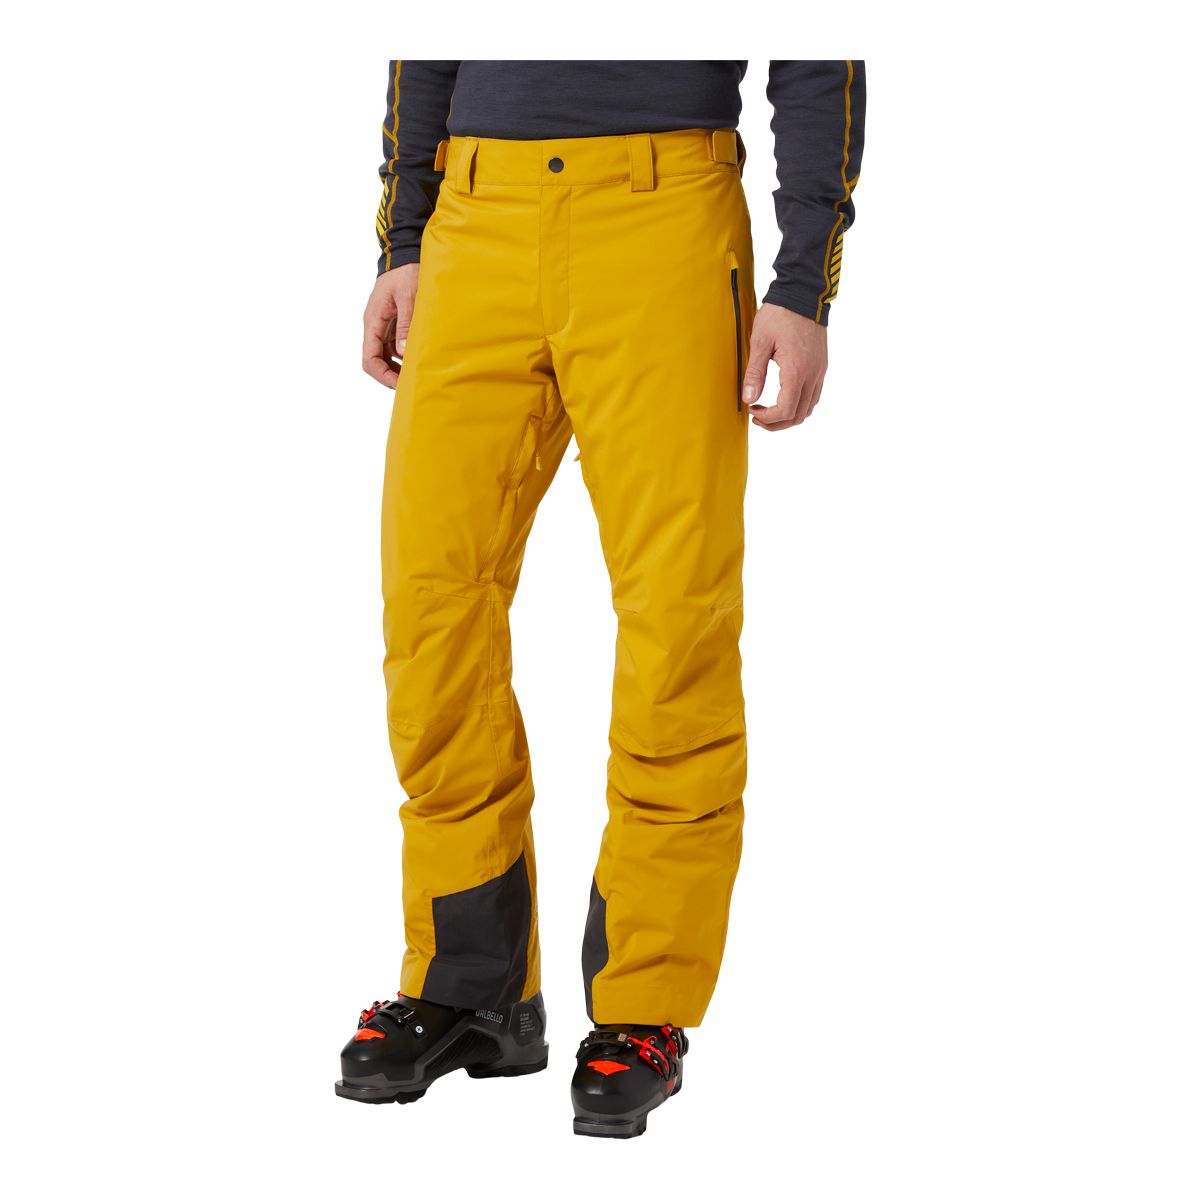 Mens Bib Snow Pants Canada In Store or Shop Online Outtaboundsca   Outtabounds